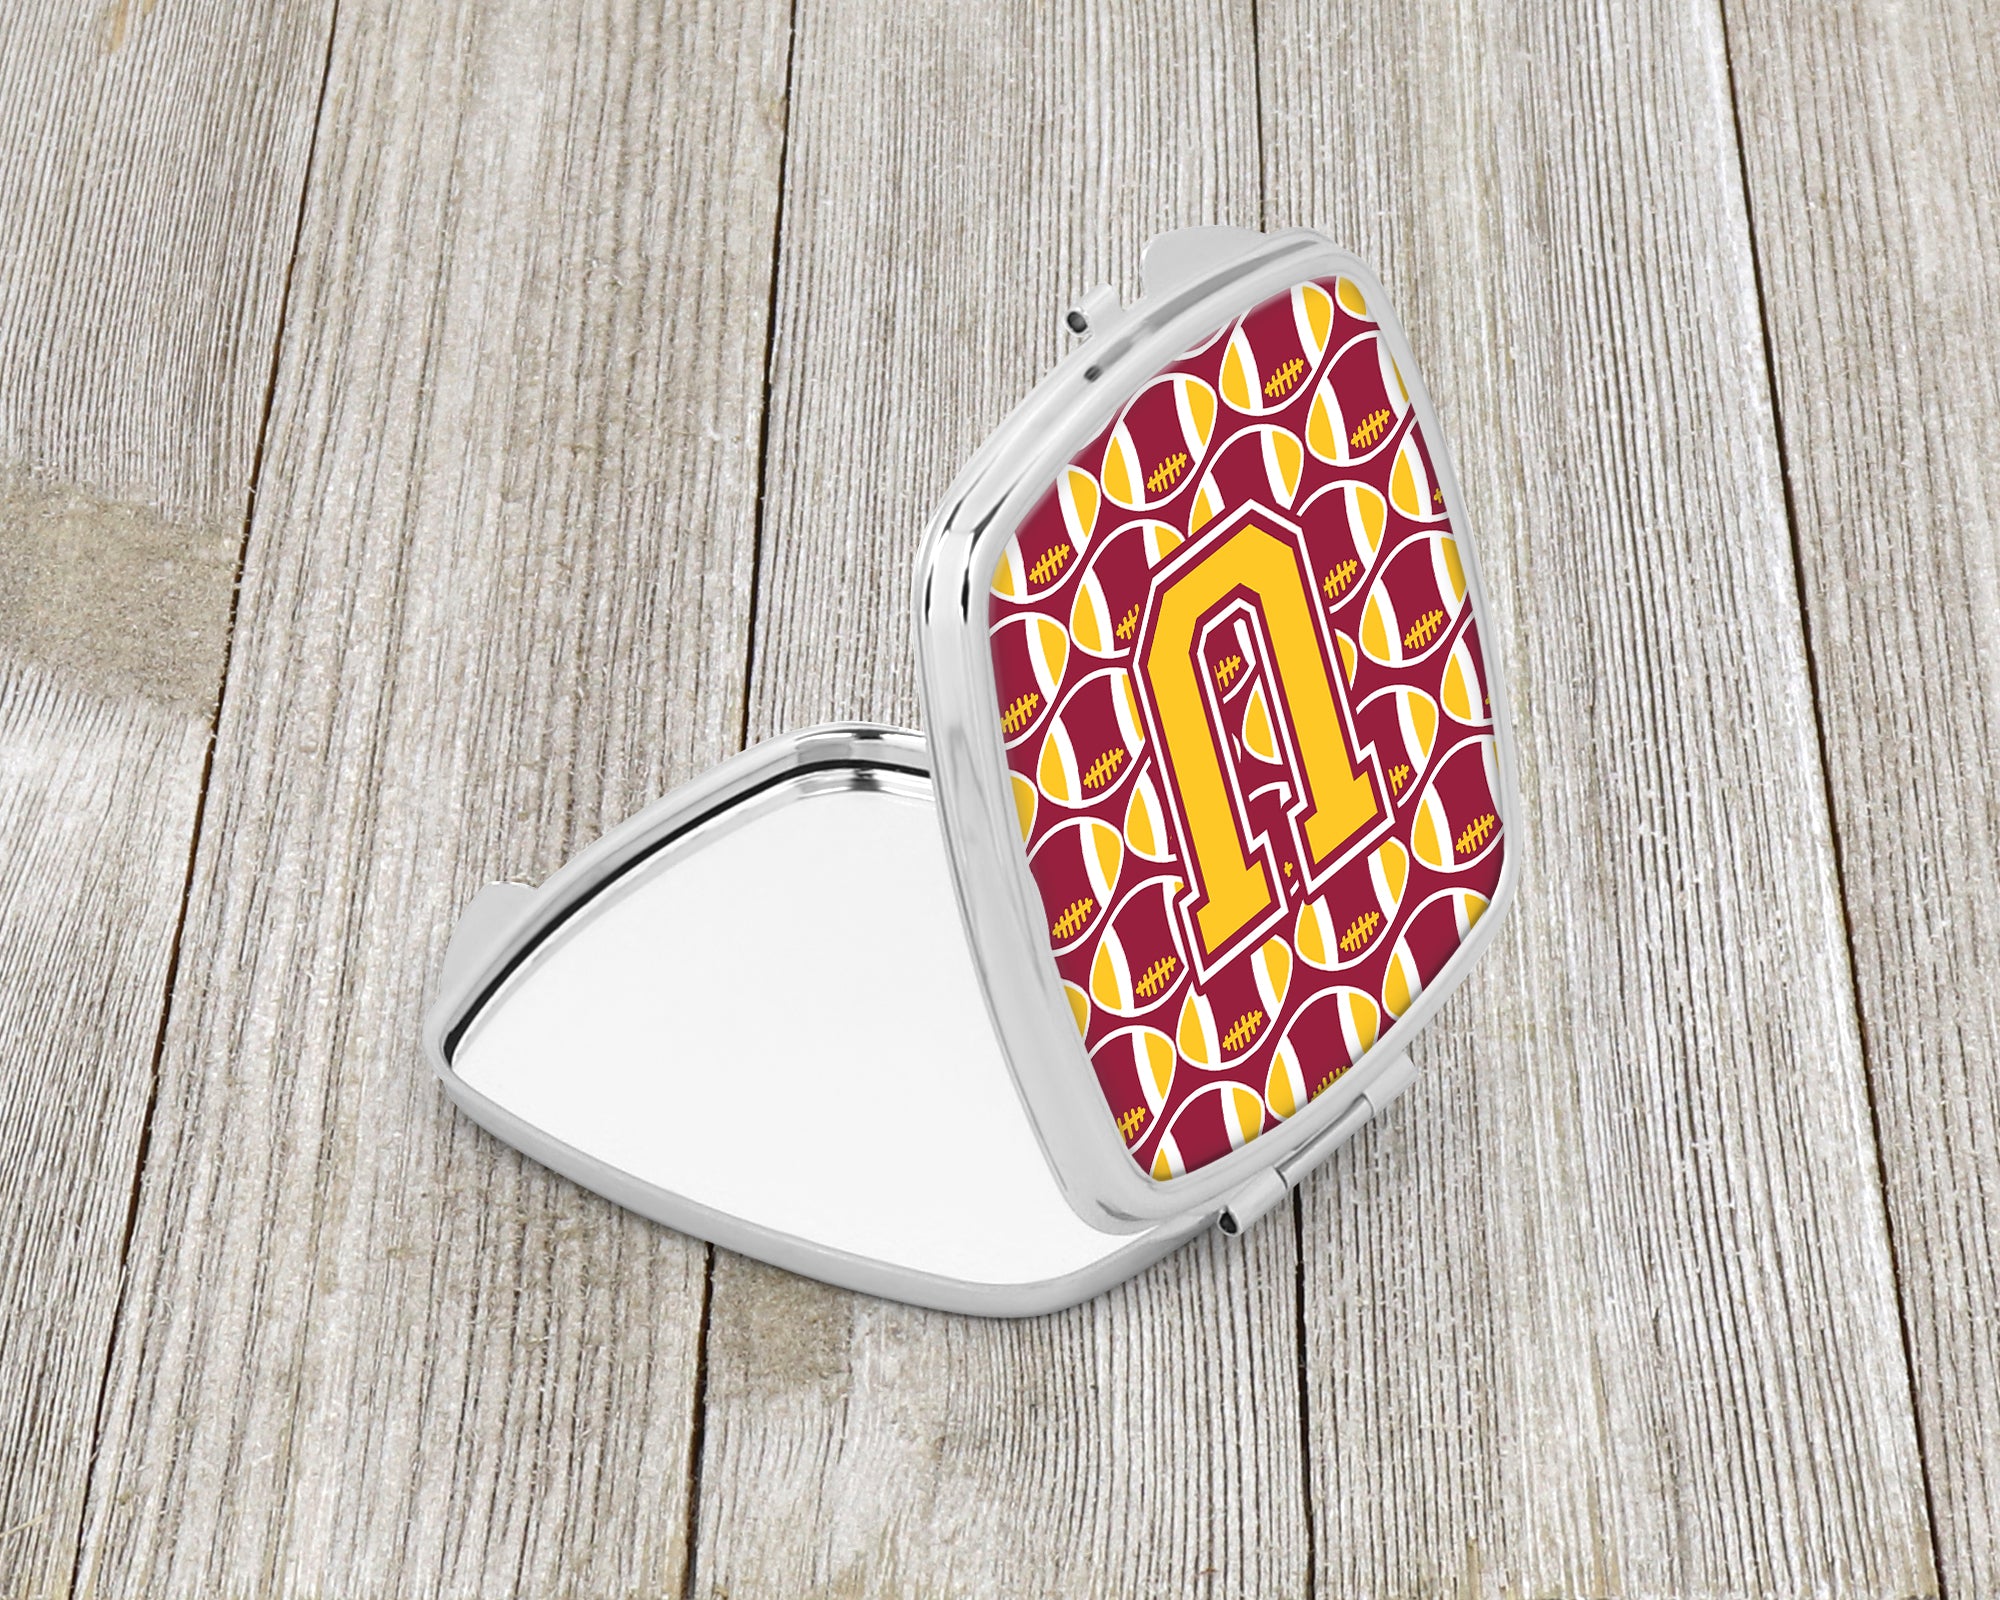 Letter U Football Maroon and Gold Compact Mirror CJ1081-USCM